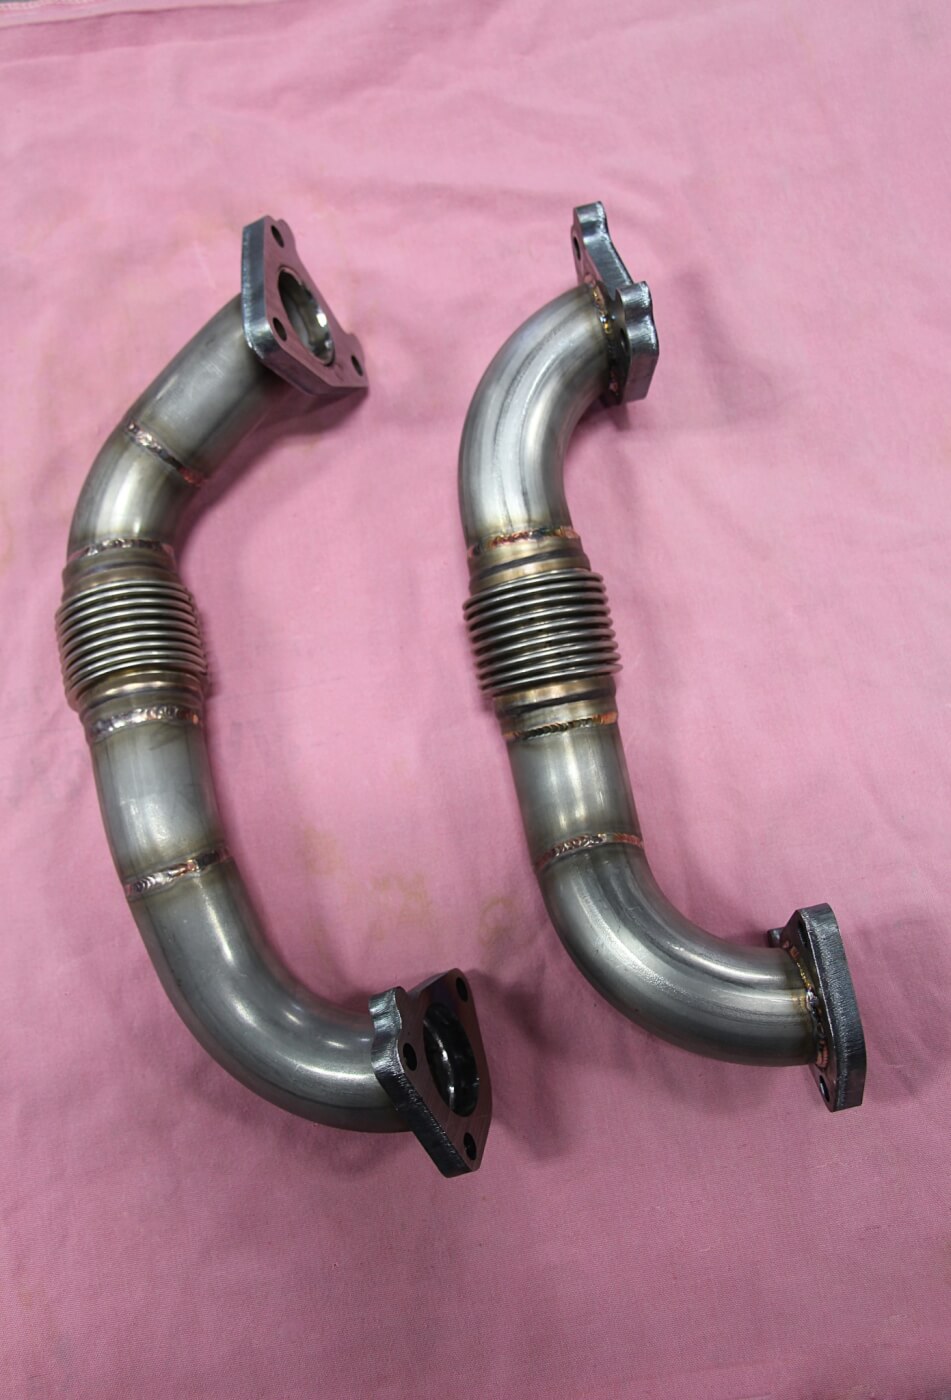 7. Prior to reinstalling the transmission, the guys at Randall’s bolted these high flow up-pipes to the factory exhaust manifolds. Made by Wehrli Custom Fabrication, the symmetrical pipes measure 2-inches in diameter, feature smooth bends, and are made from 11-gauge stainless steel. The primary reason for upgrading to the 2-inch up-pipes is due to them having stronger bellows (the OE bellows can blow out) and the fact that they help decrease exhaust gas temps. 